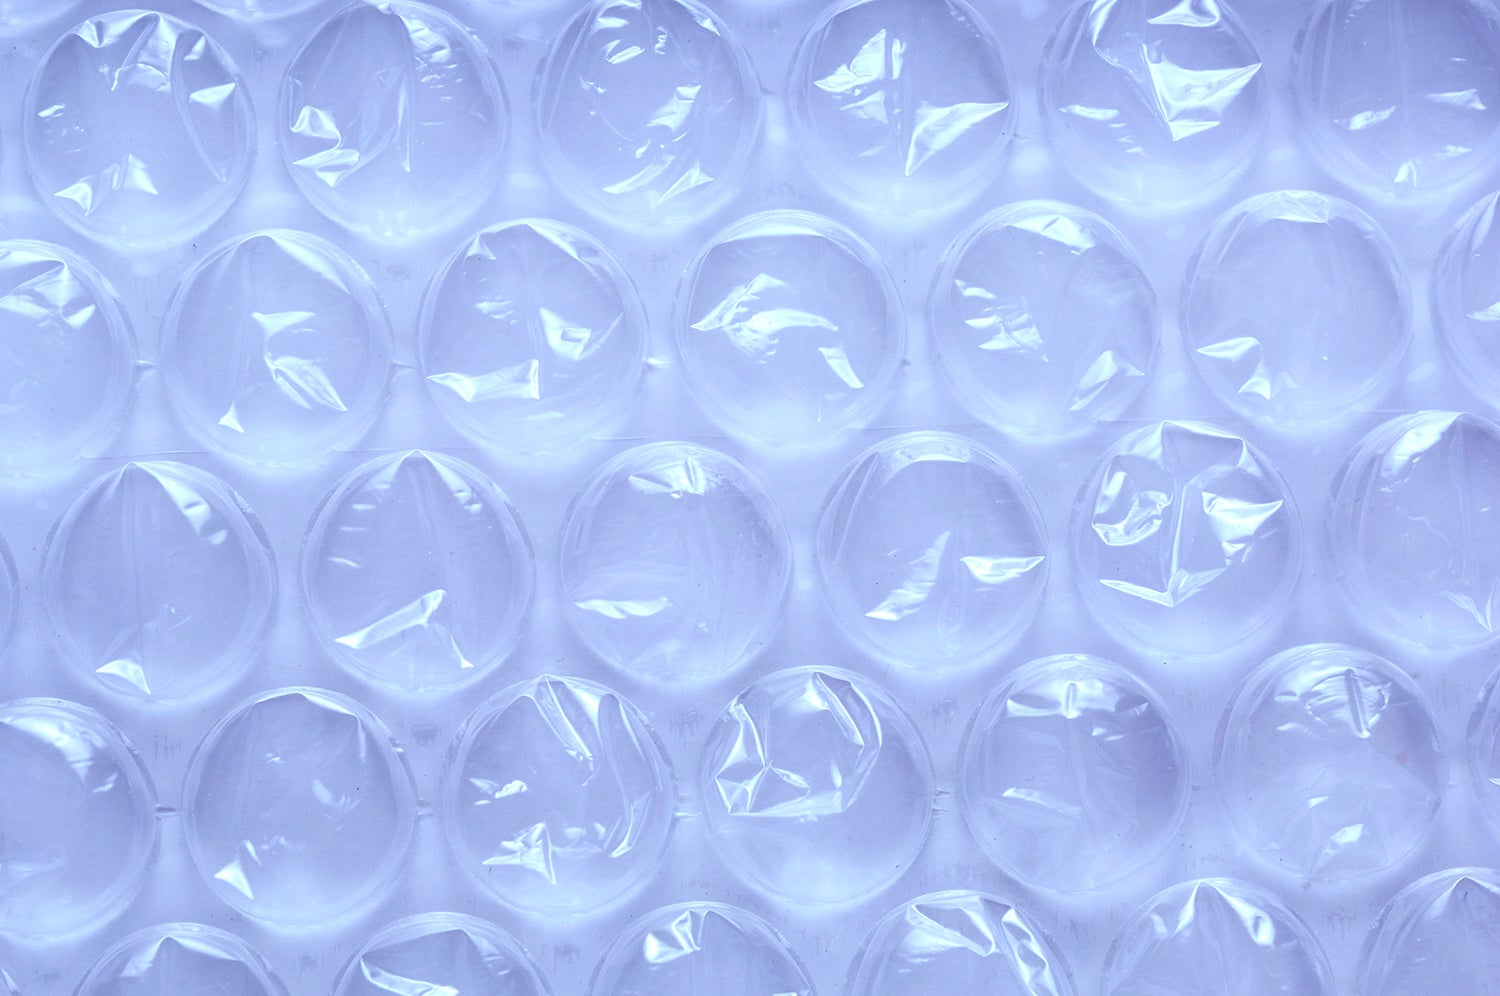 All this bubble wrap and you still broke